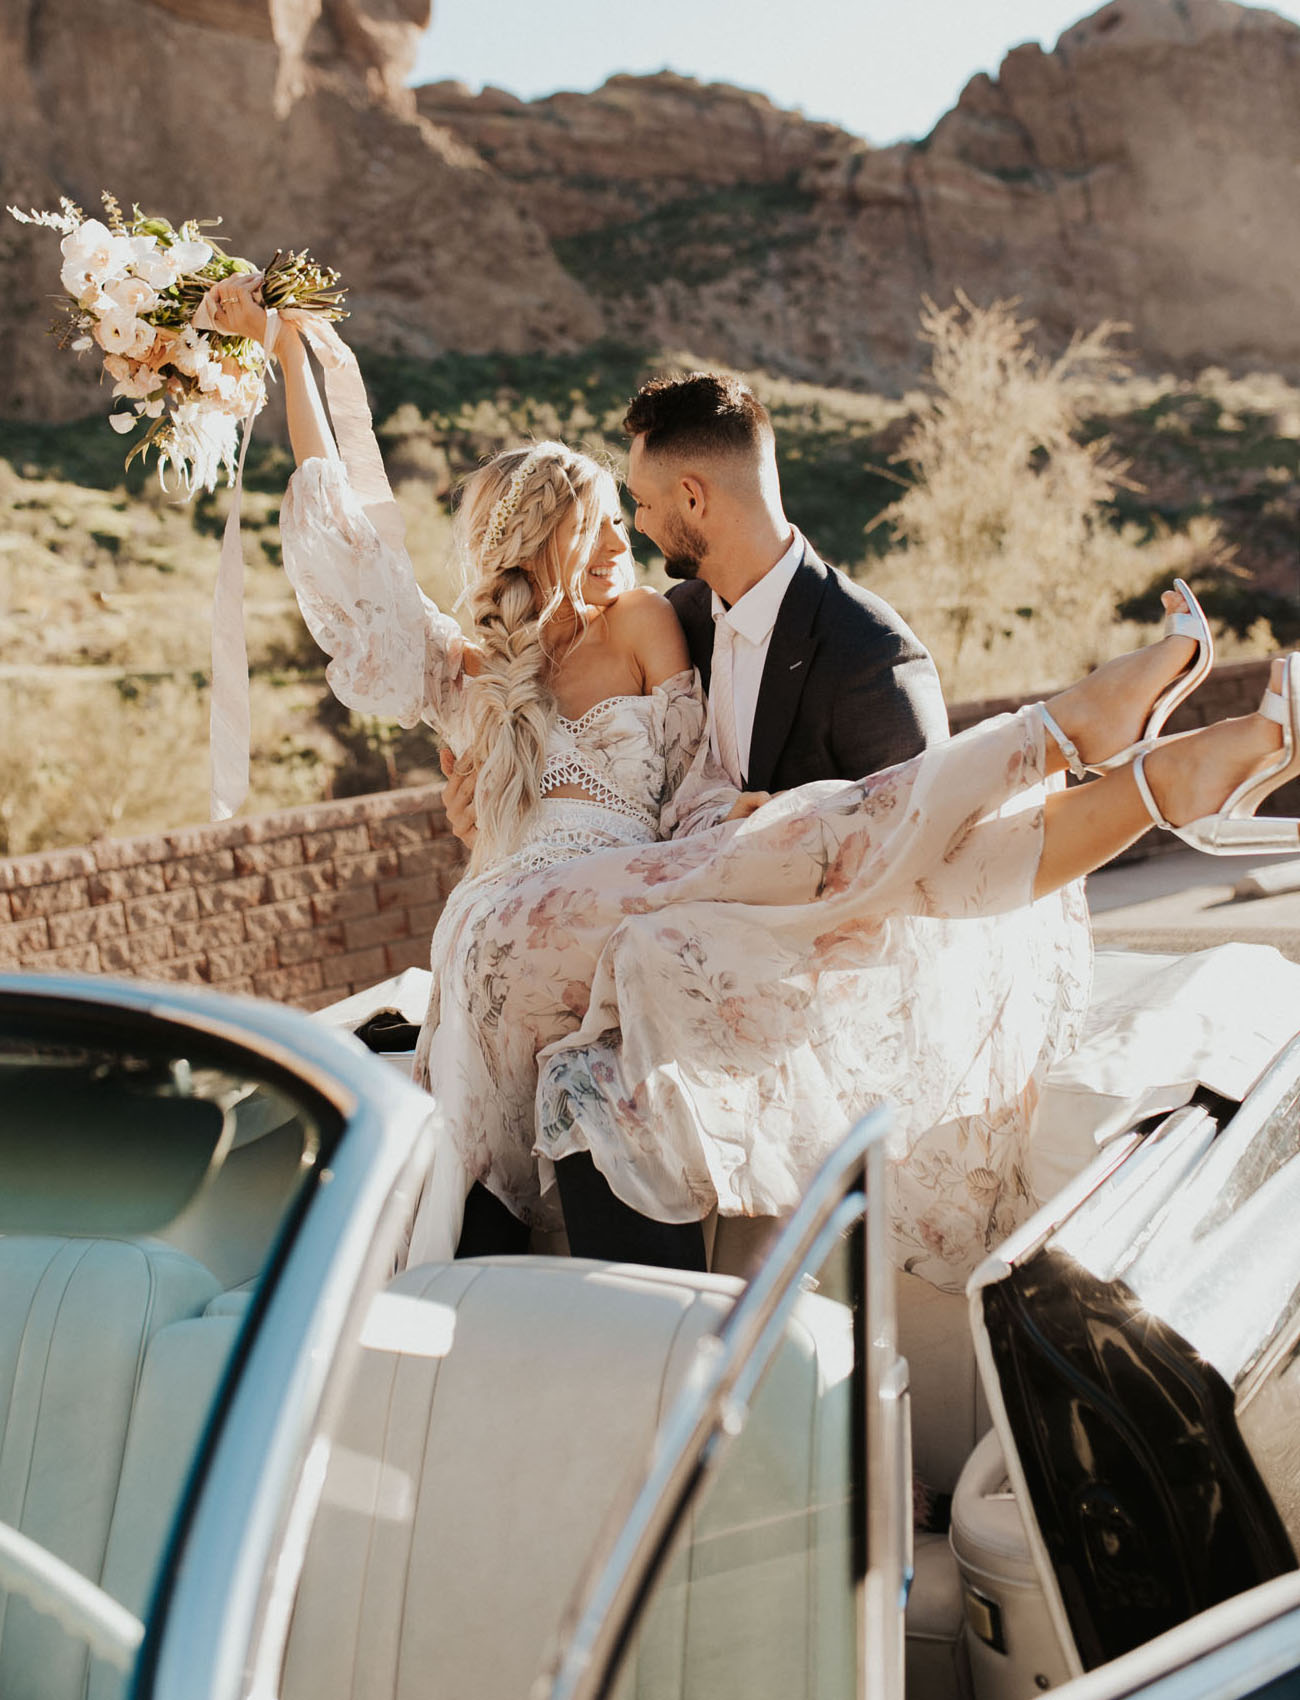 Riding a retro car is a fun adventure for a couple on their wedding day